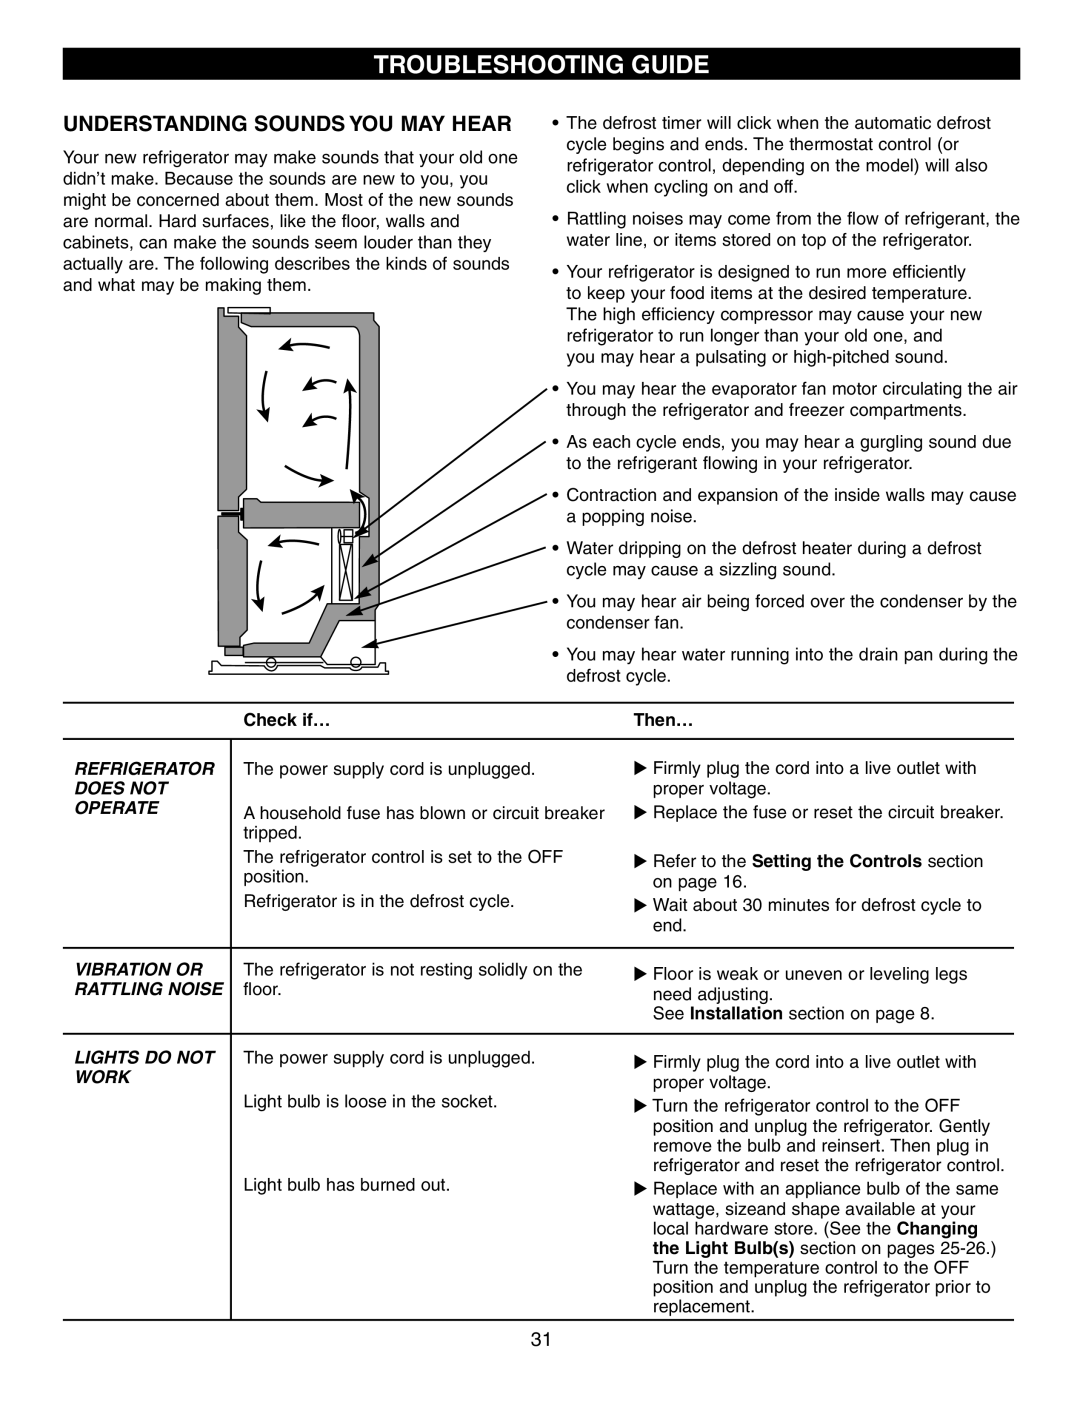 LG Electronics LFC25760 manual Troubleshooting Guide, Understanding Sounds You May Hear, Check if…, Then… 